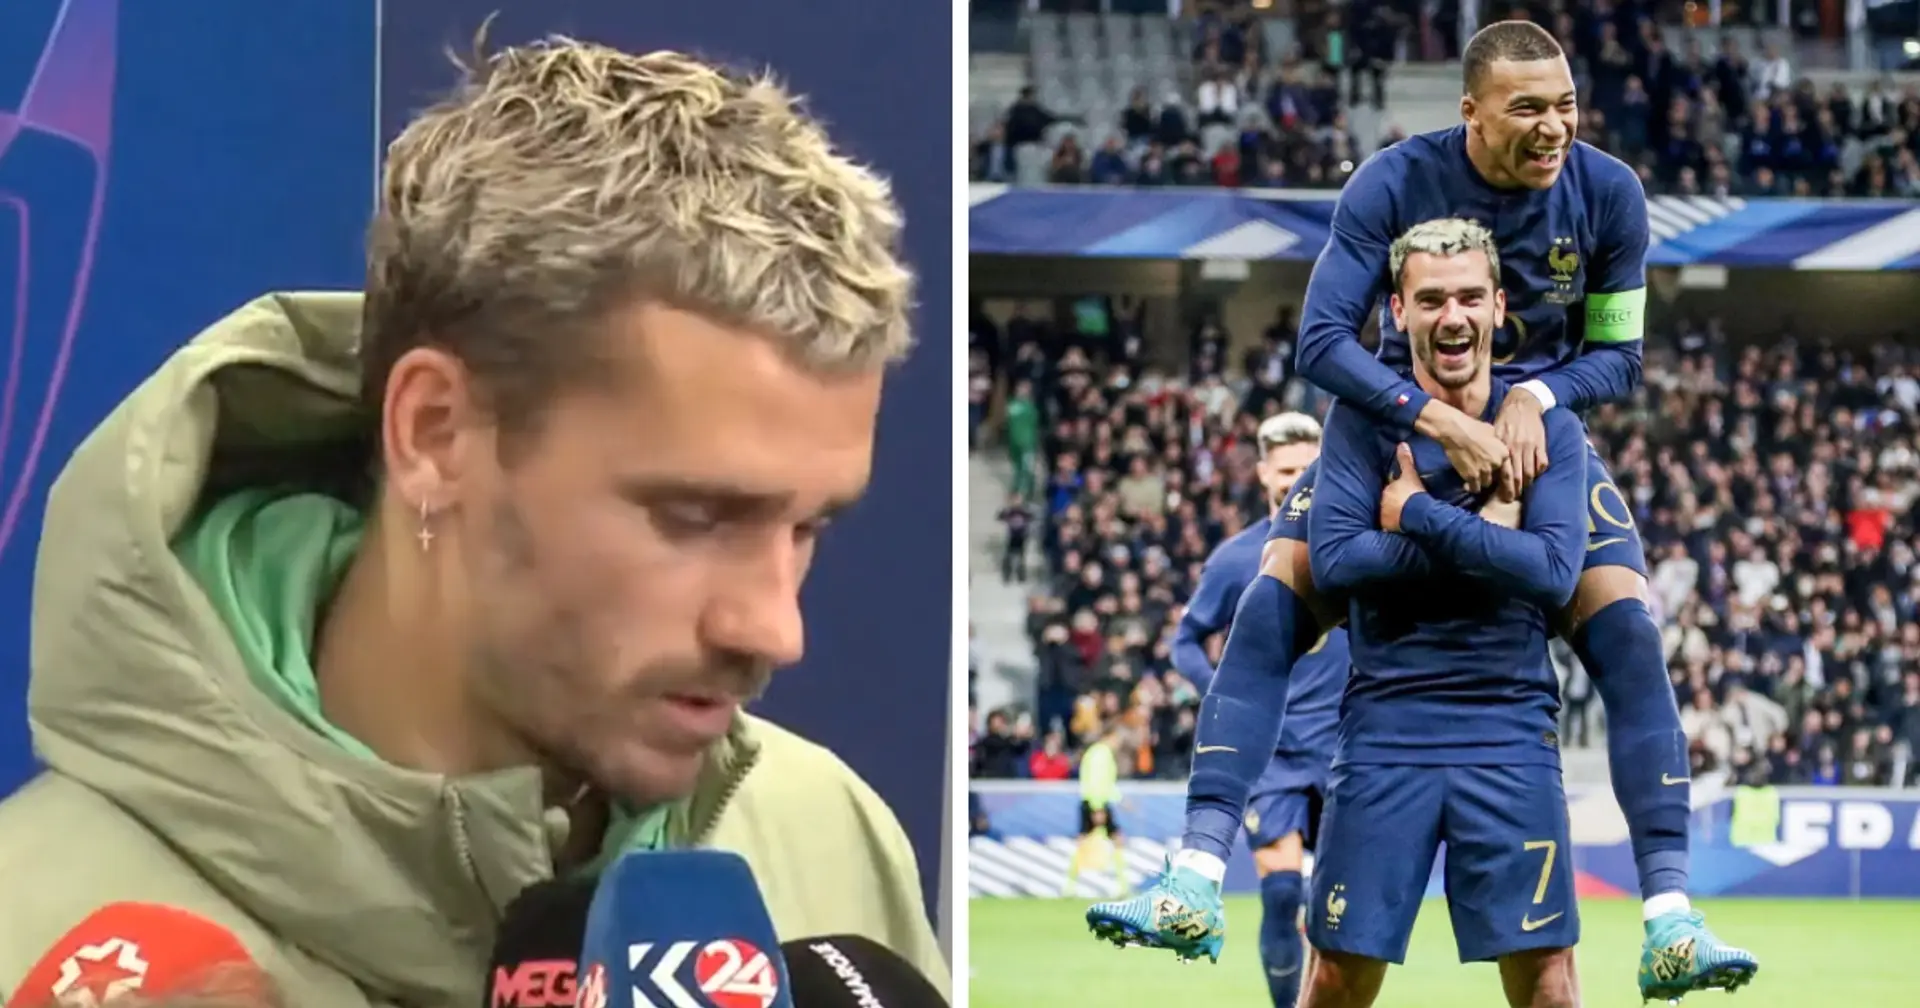 'Griezmann has been at the table, not the other way around': Fans react to journalist's question about famous youngsters